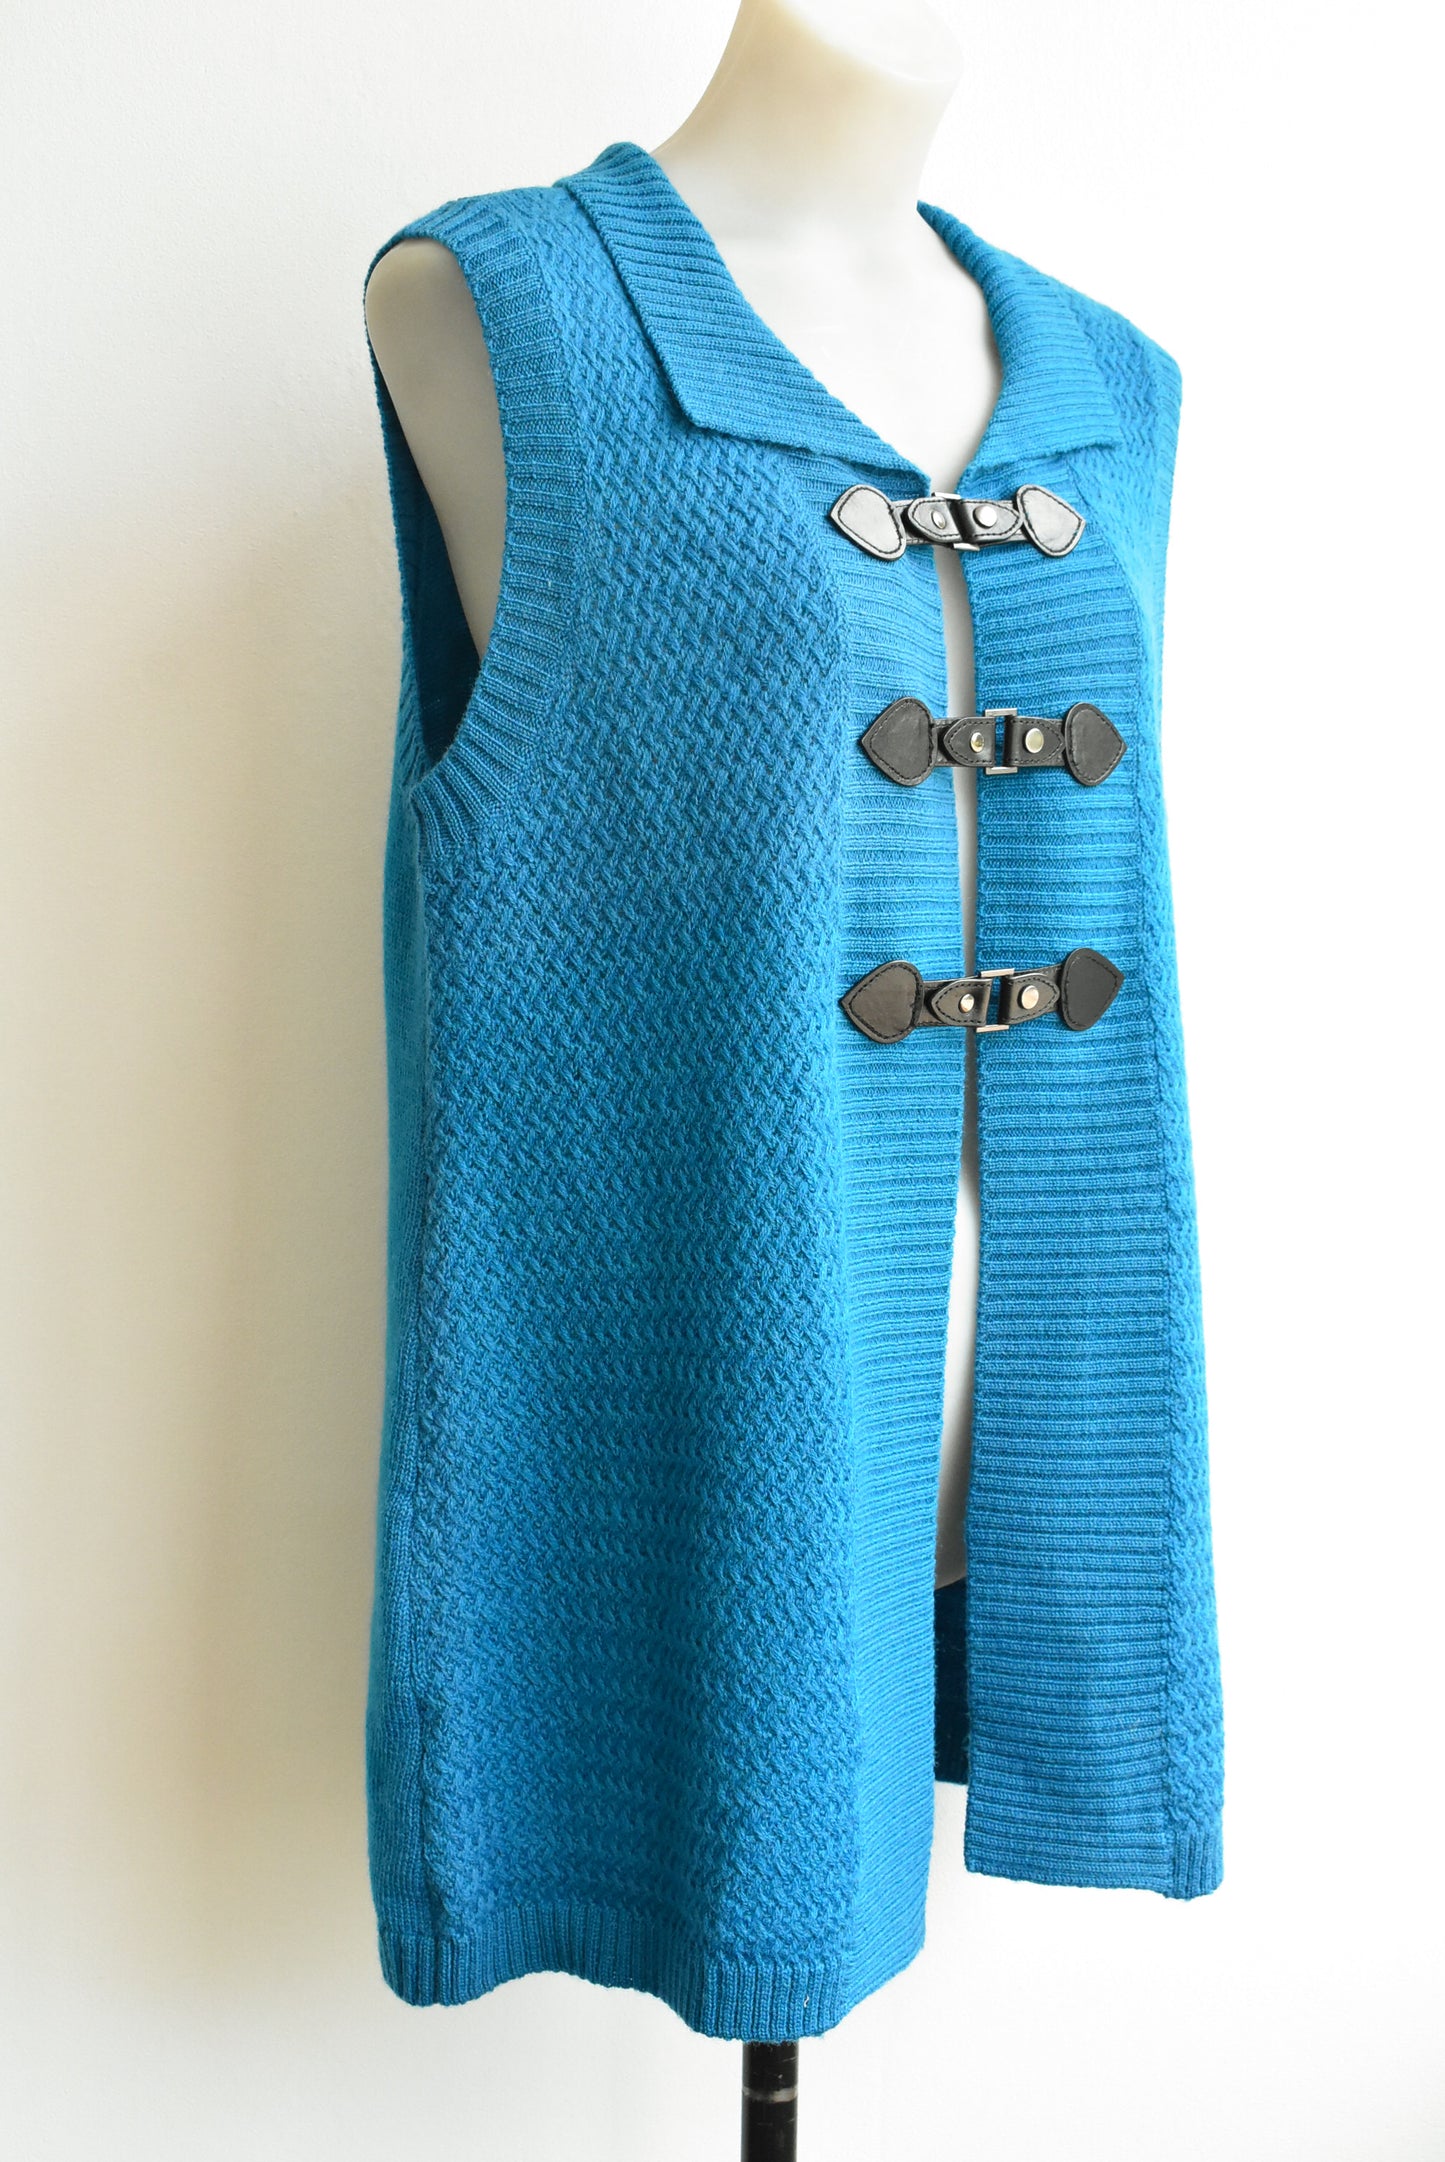 Twin Lakes wool long teal vest, size S/M